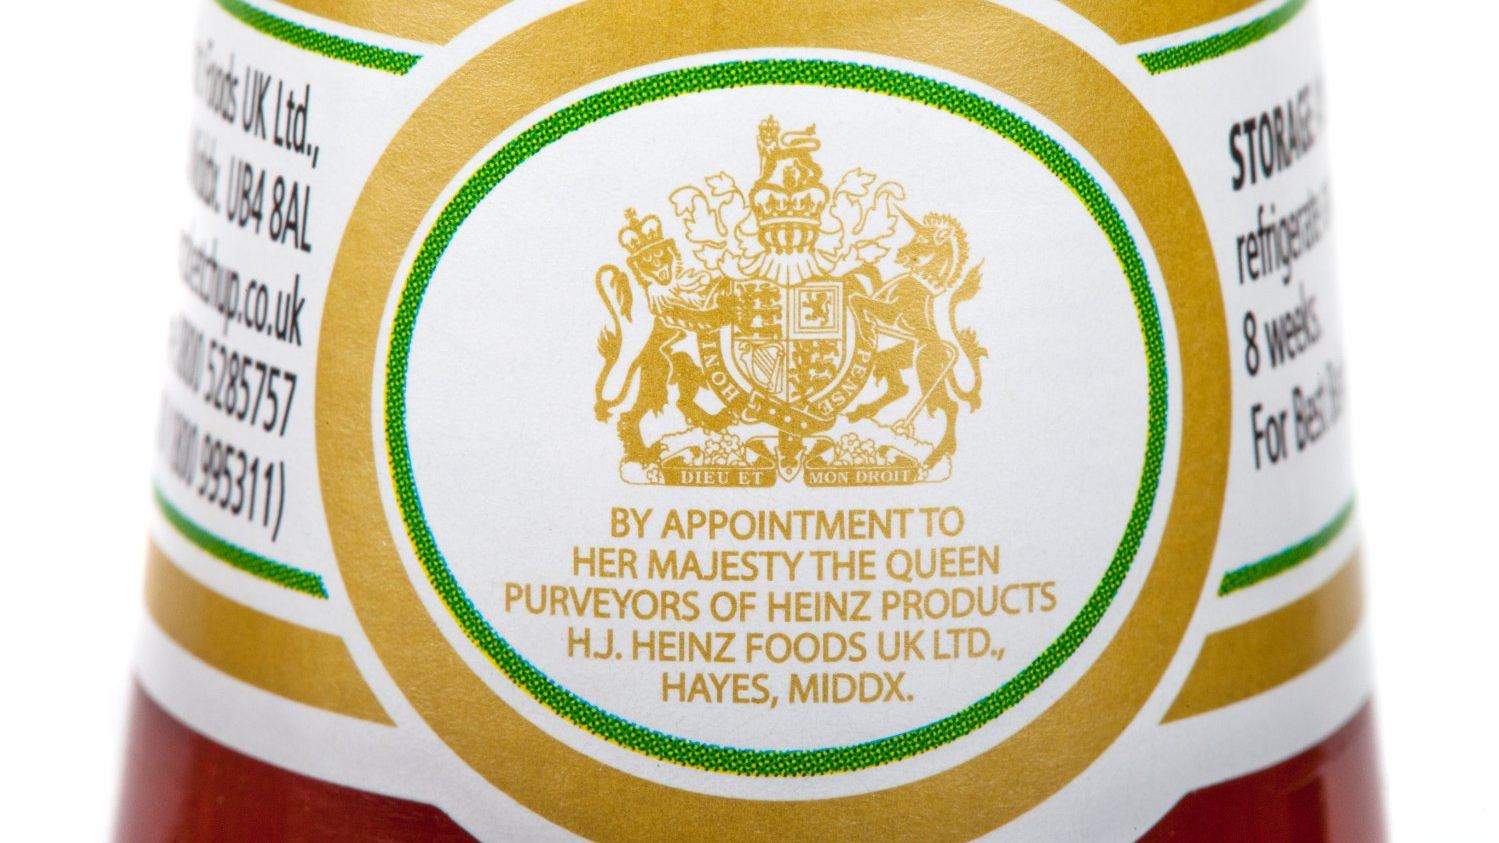 Now That Royal Warrants Have Expired, Will King Charles’ Ascension Force Some Brands To Change Their Packaging?